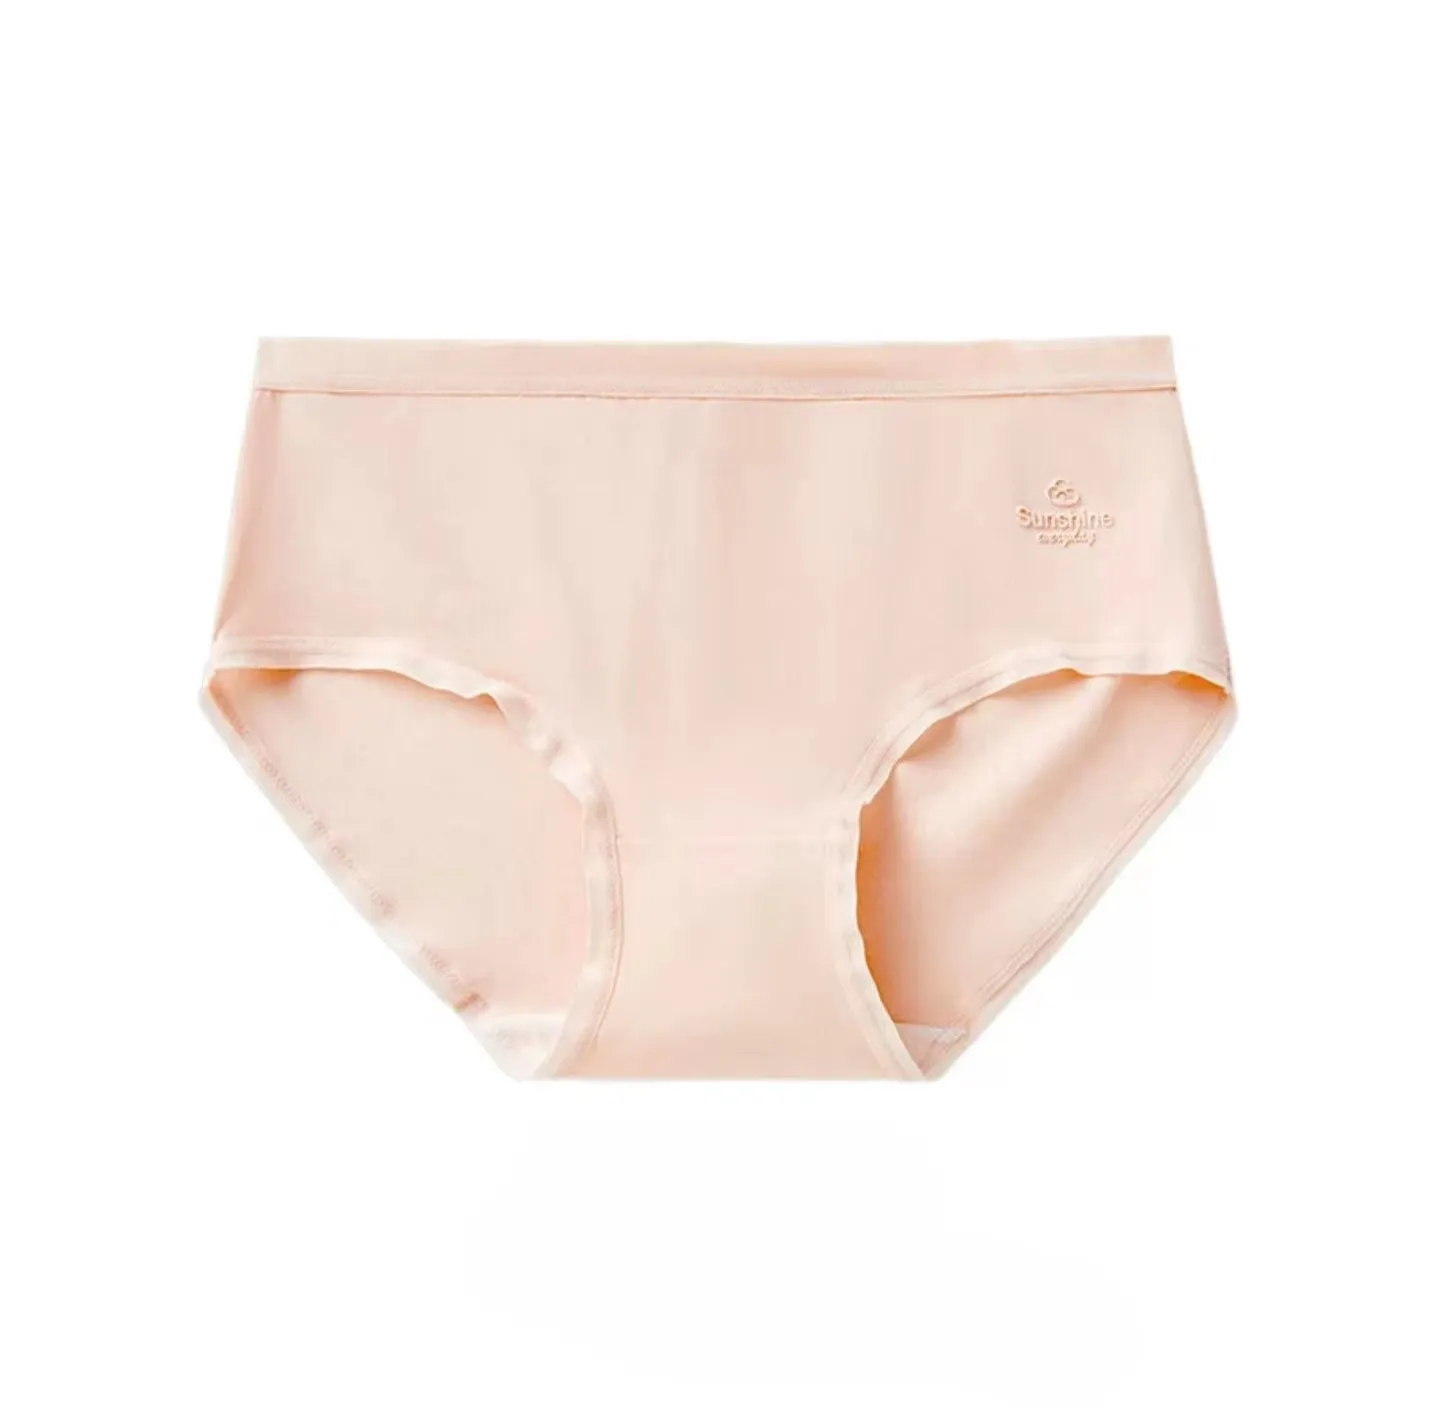 Feel Fresh All Day With These Game-Changing Cotton Panties!